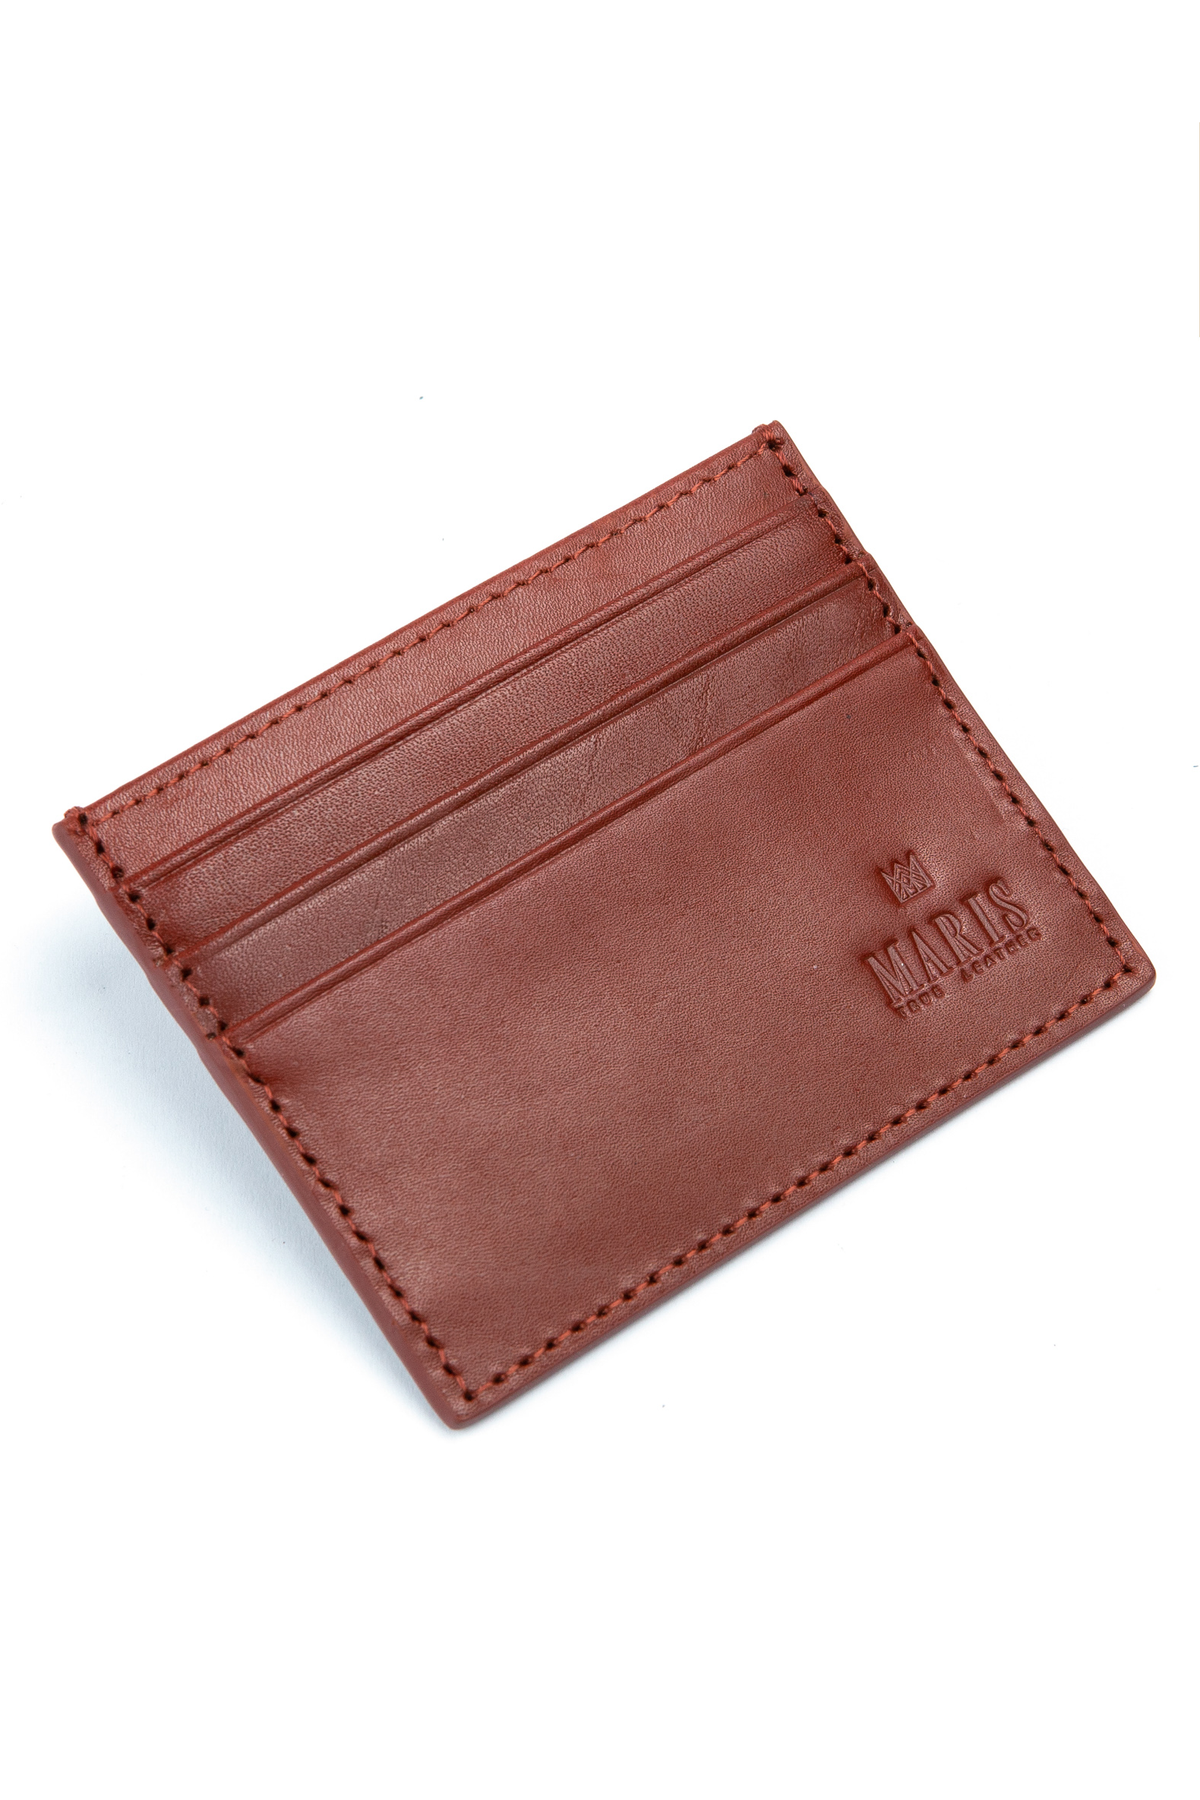 Leather Cardcase and Iwatch Band Set